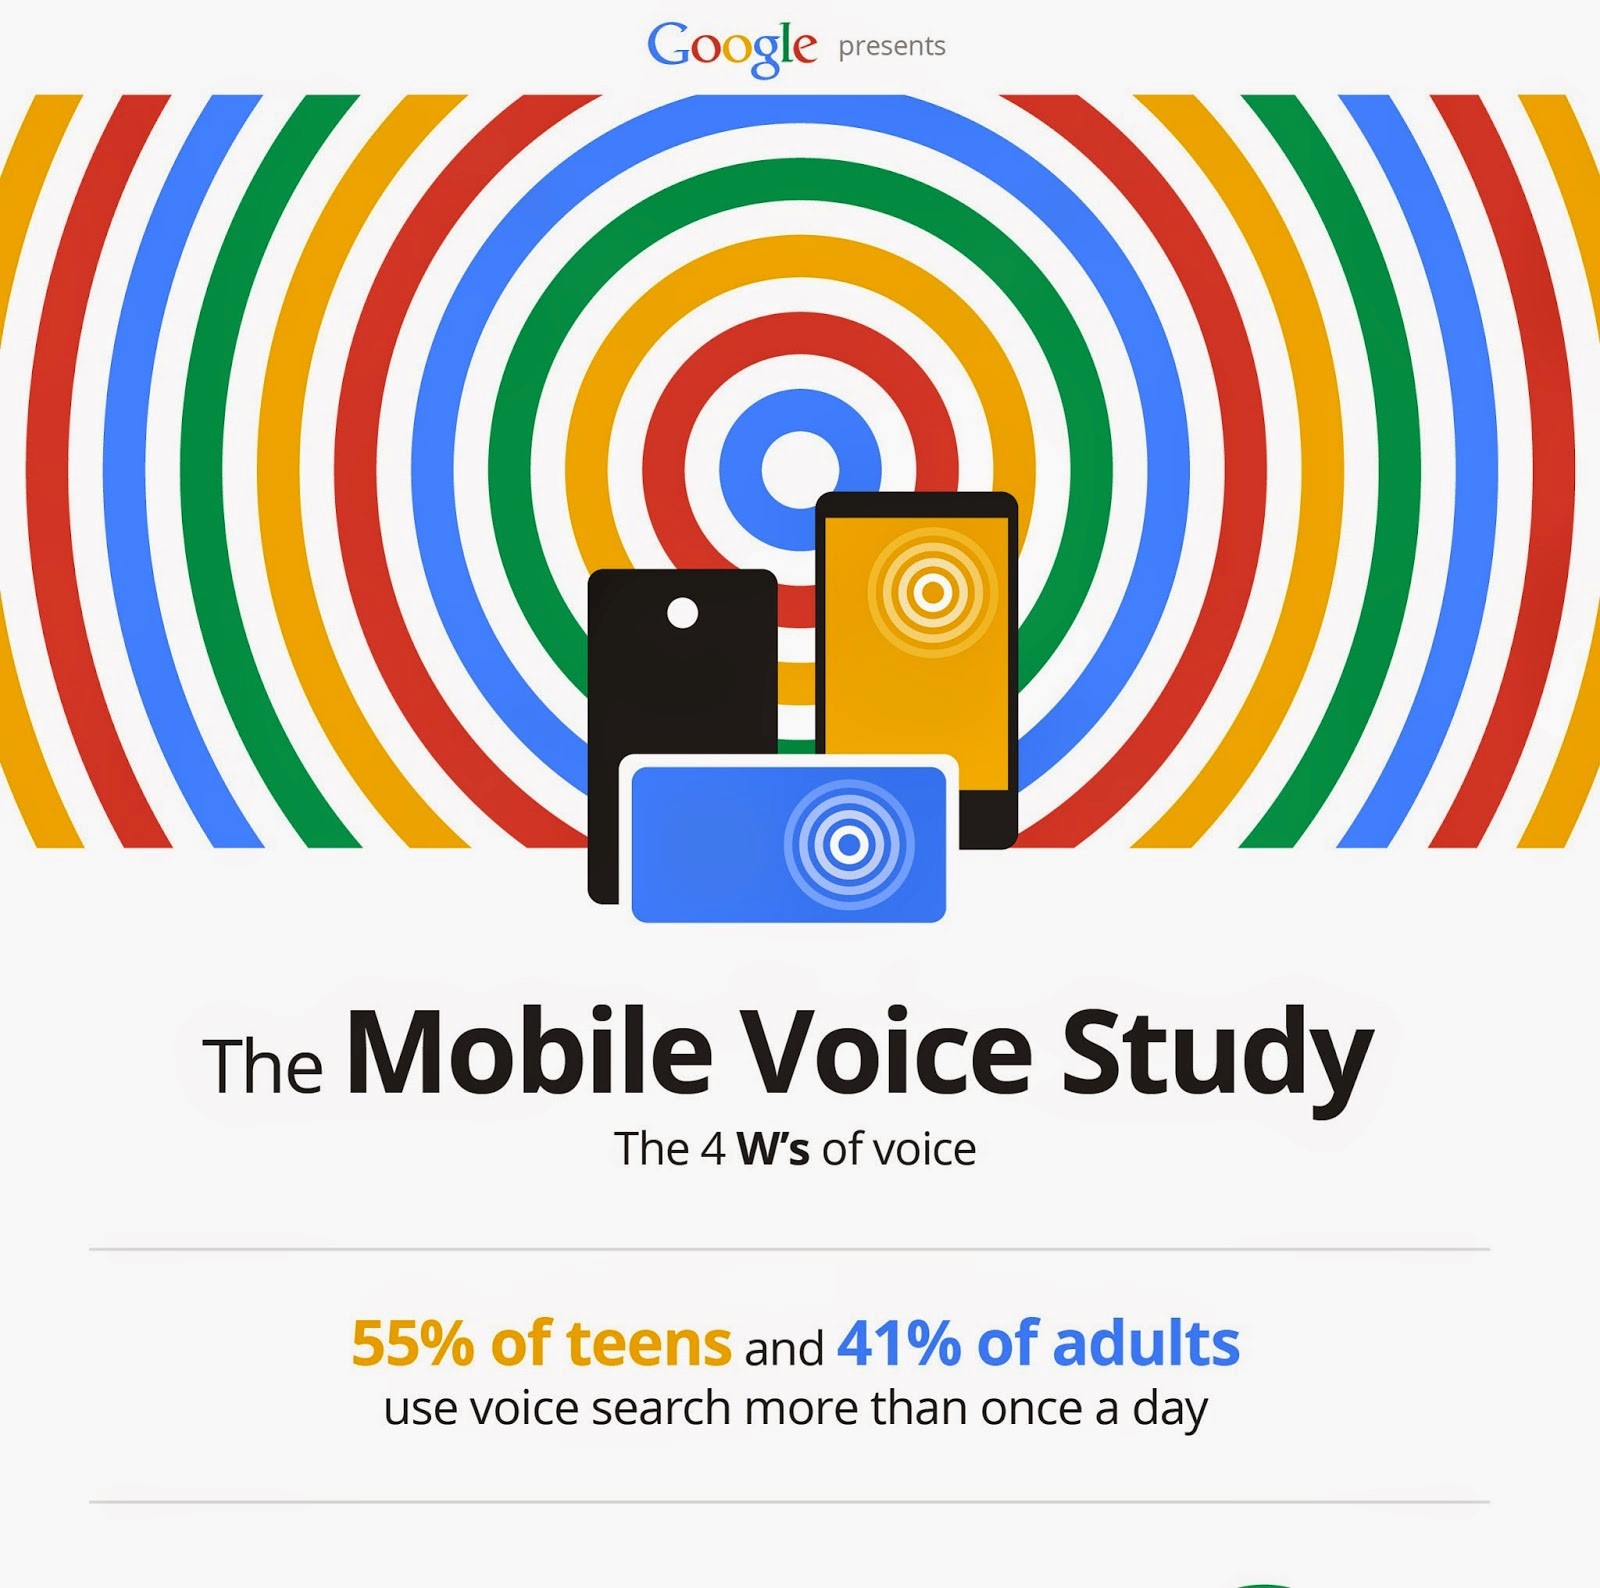 Google's Mobile Voice Study on voice search